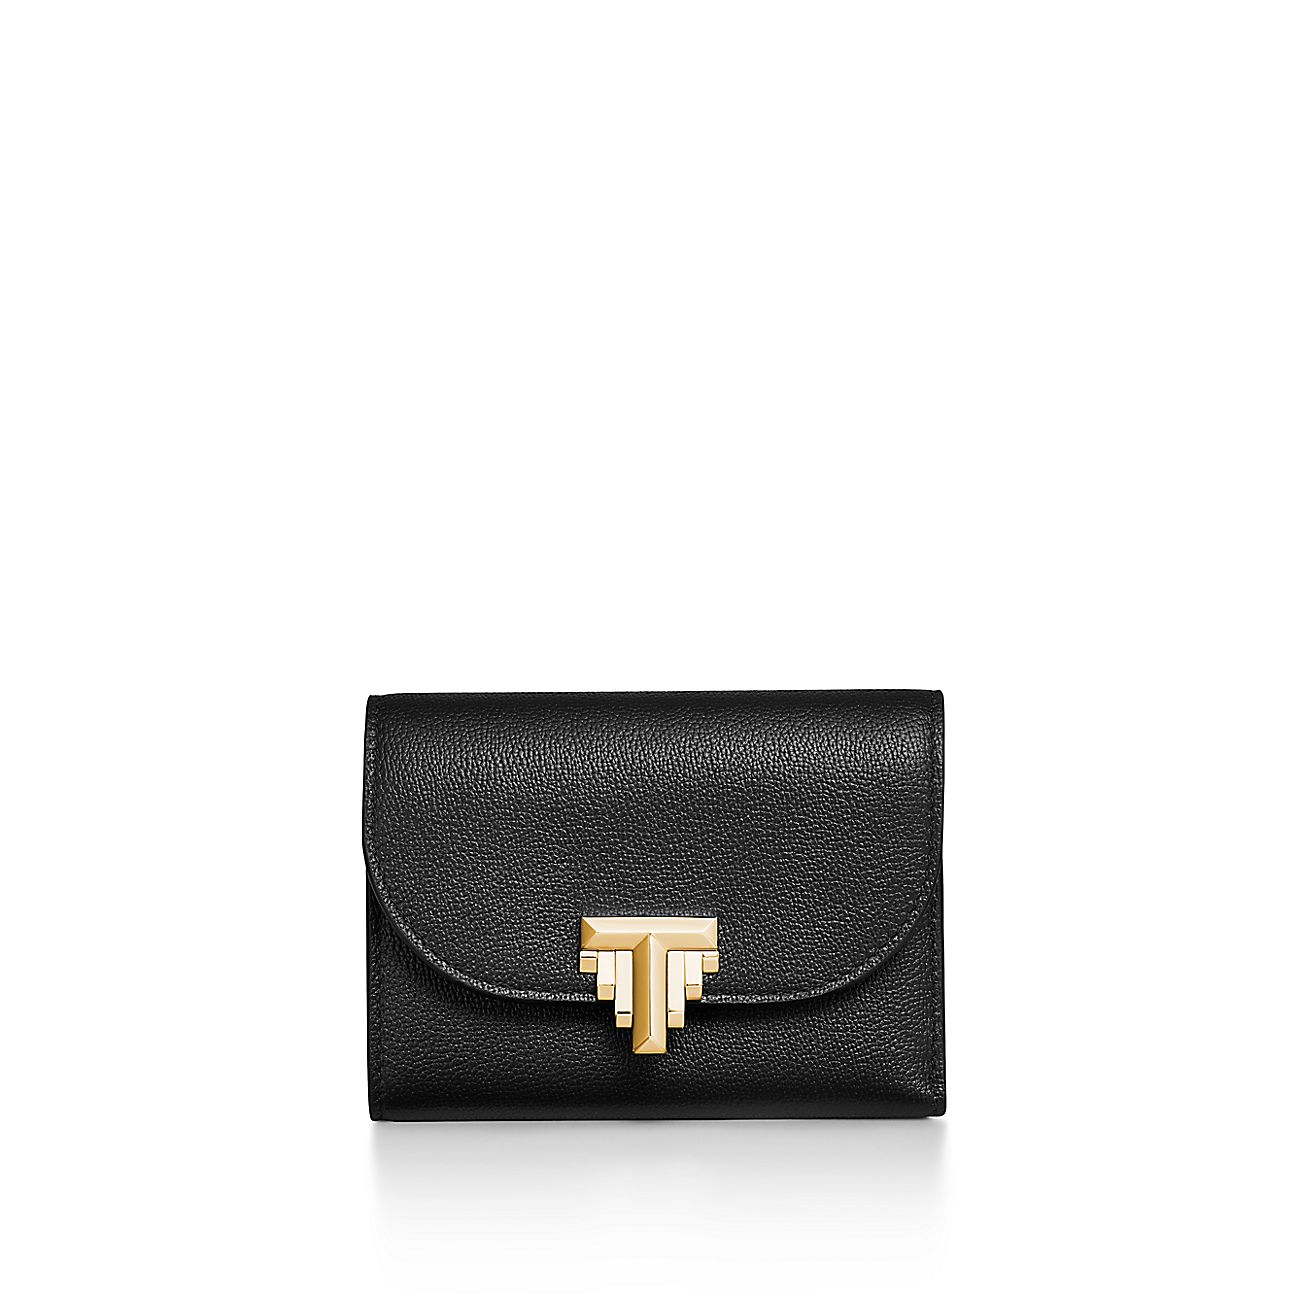 Tiffany T Deco Small Wallet in Black Leather | Tiffany & Co.